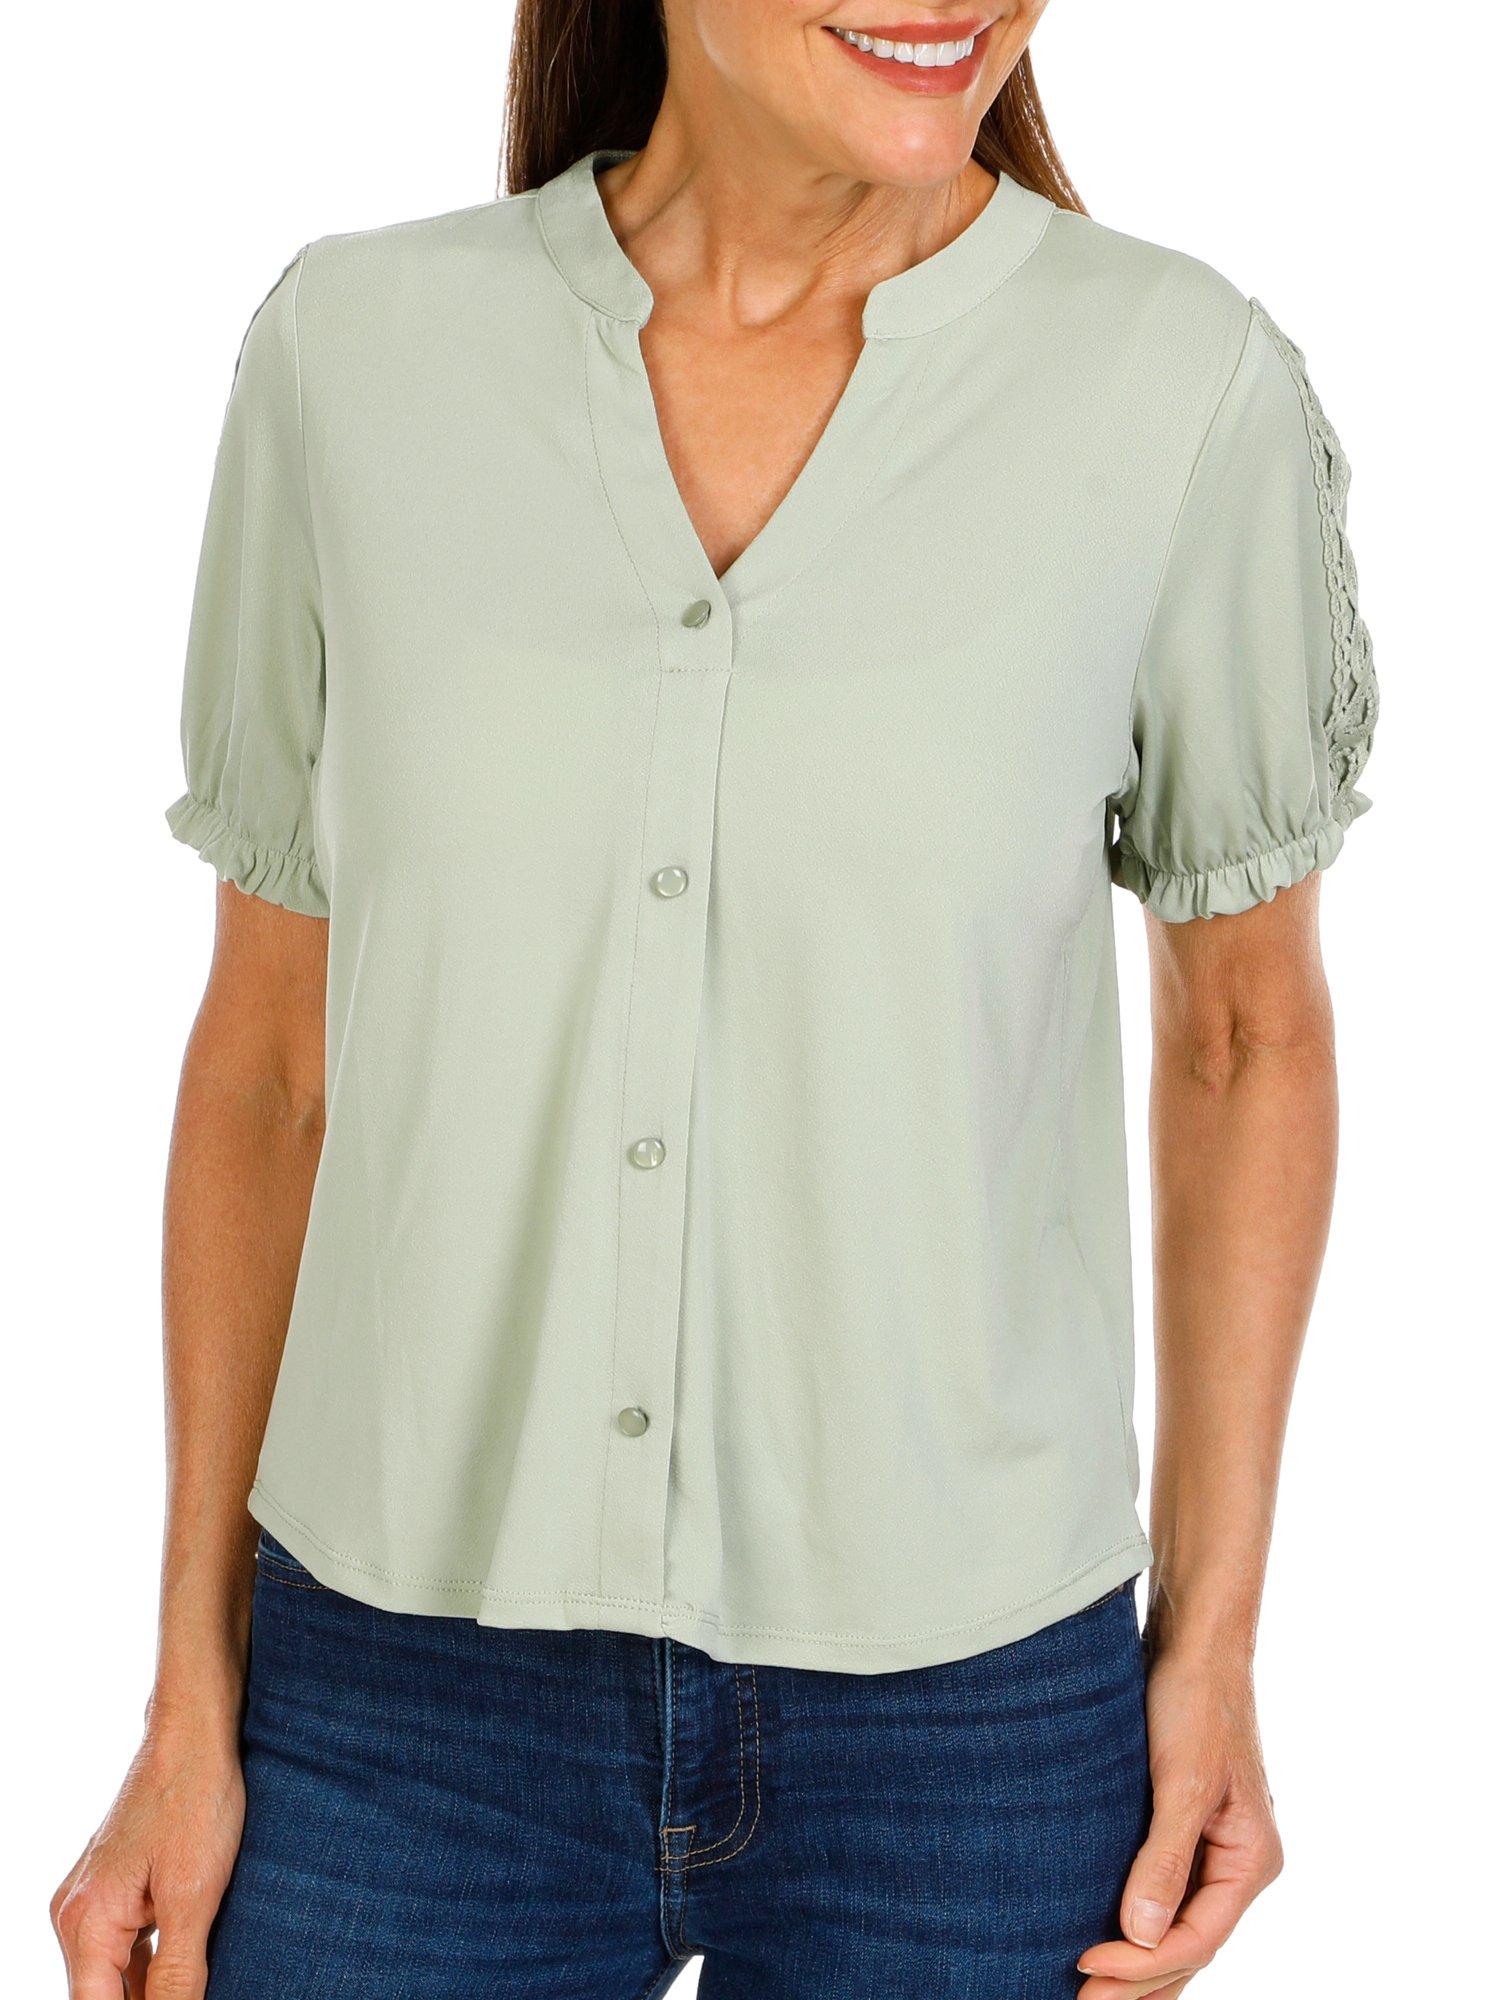 Women's Petite Solid Button Down Top